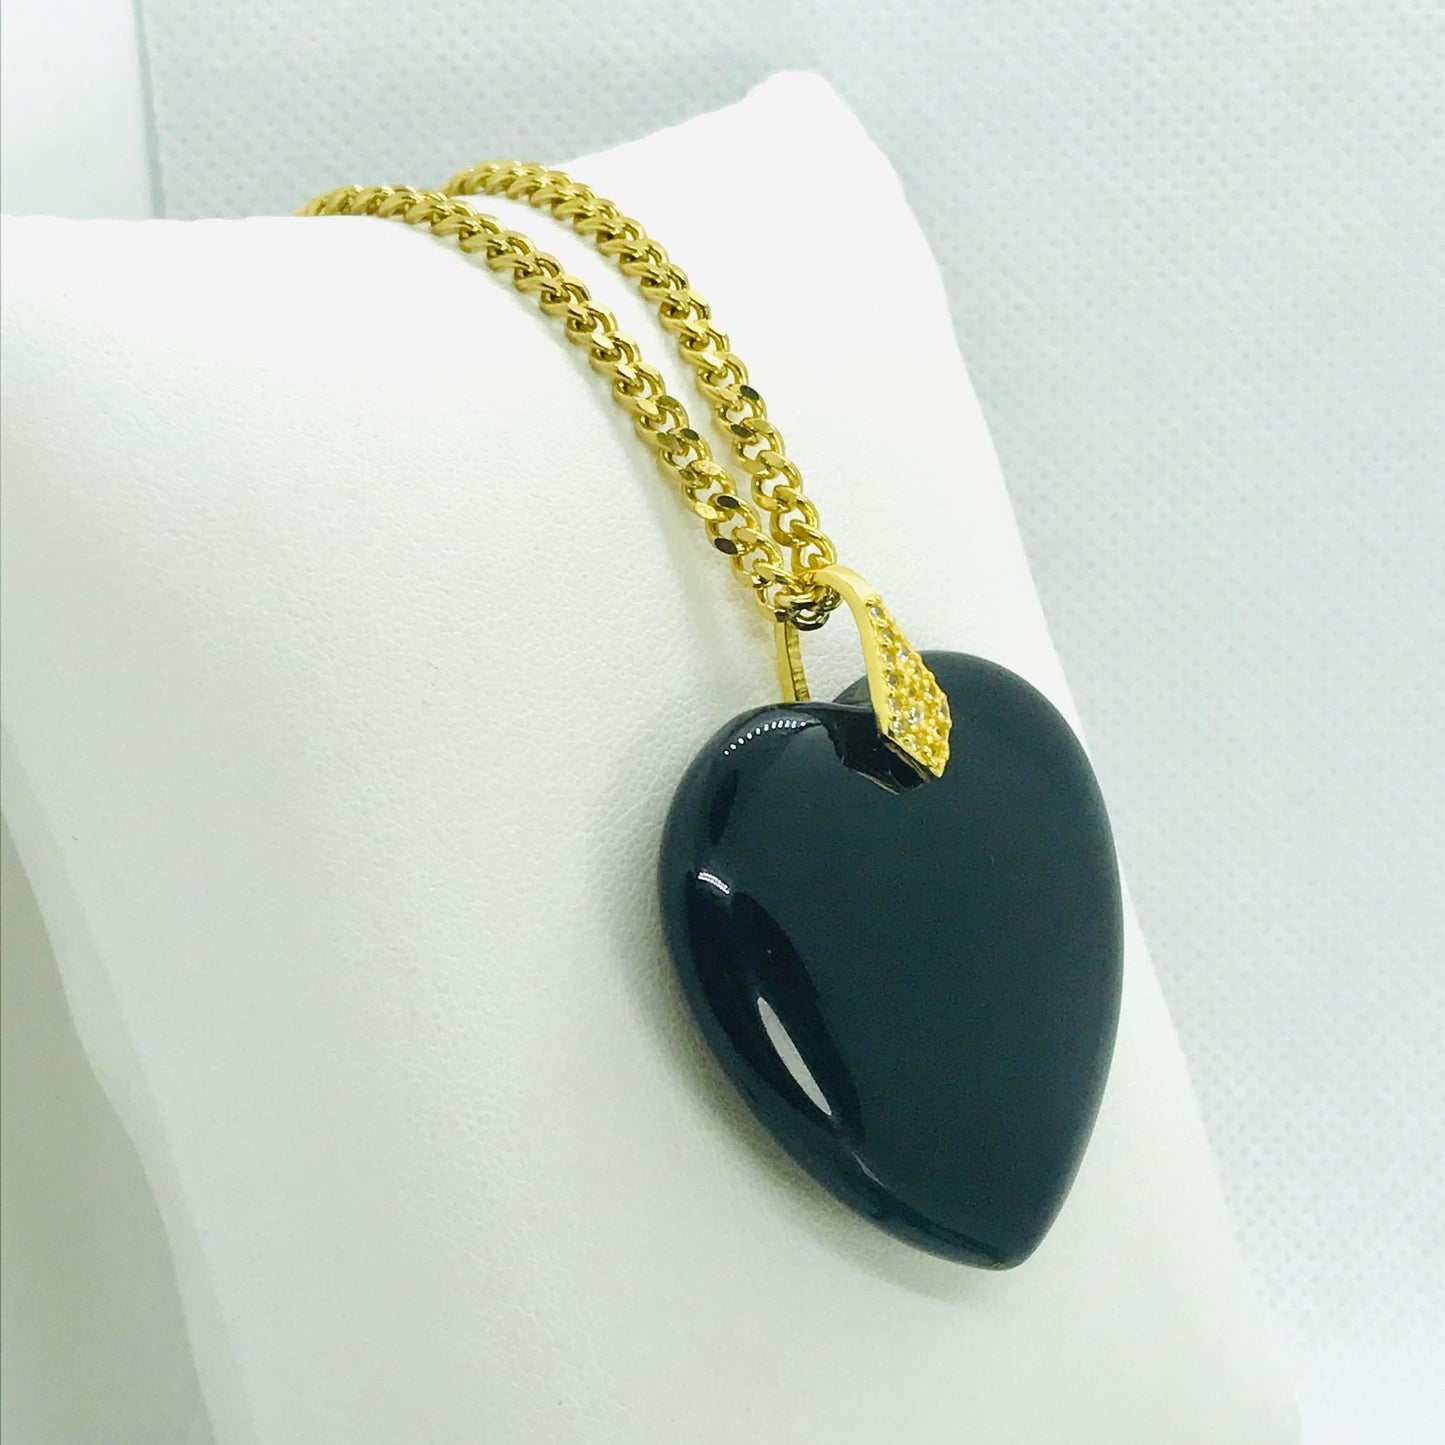 Natural Black Onyx Heart Pendant - Stainless Steel Gold Plated Chain Necklace